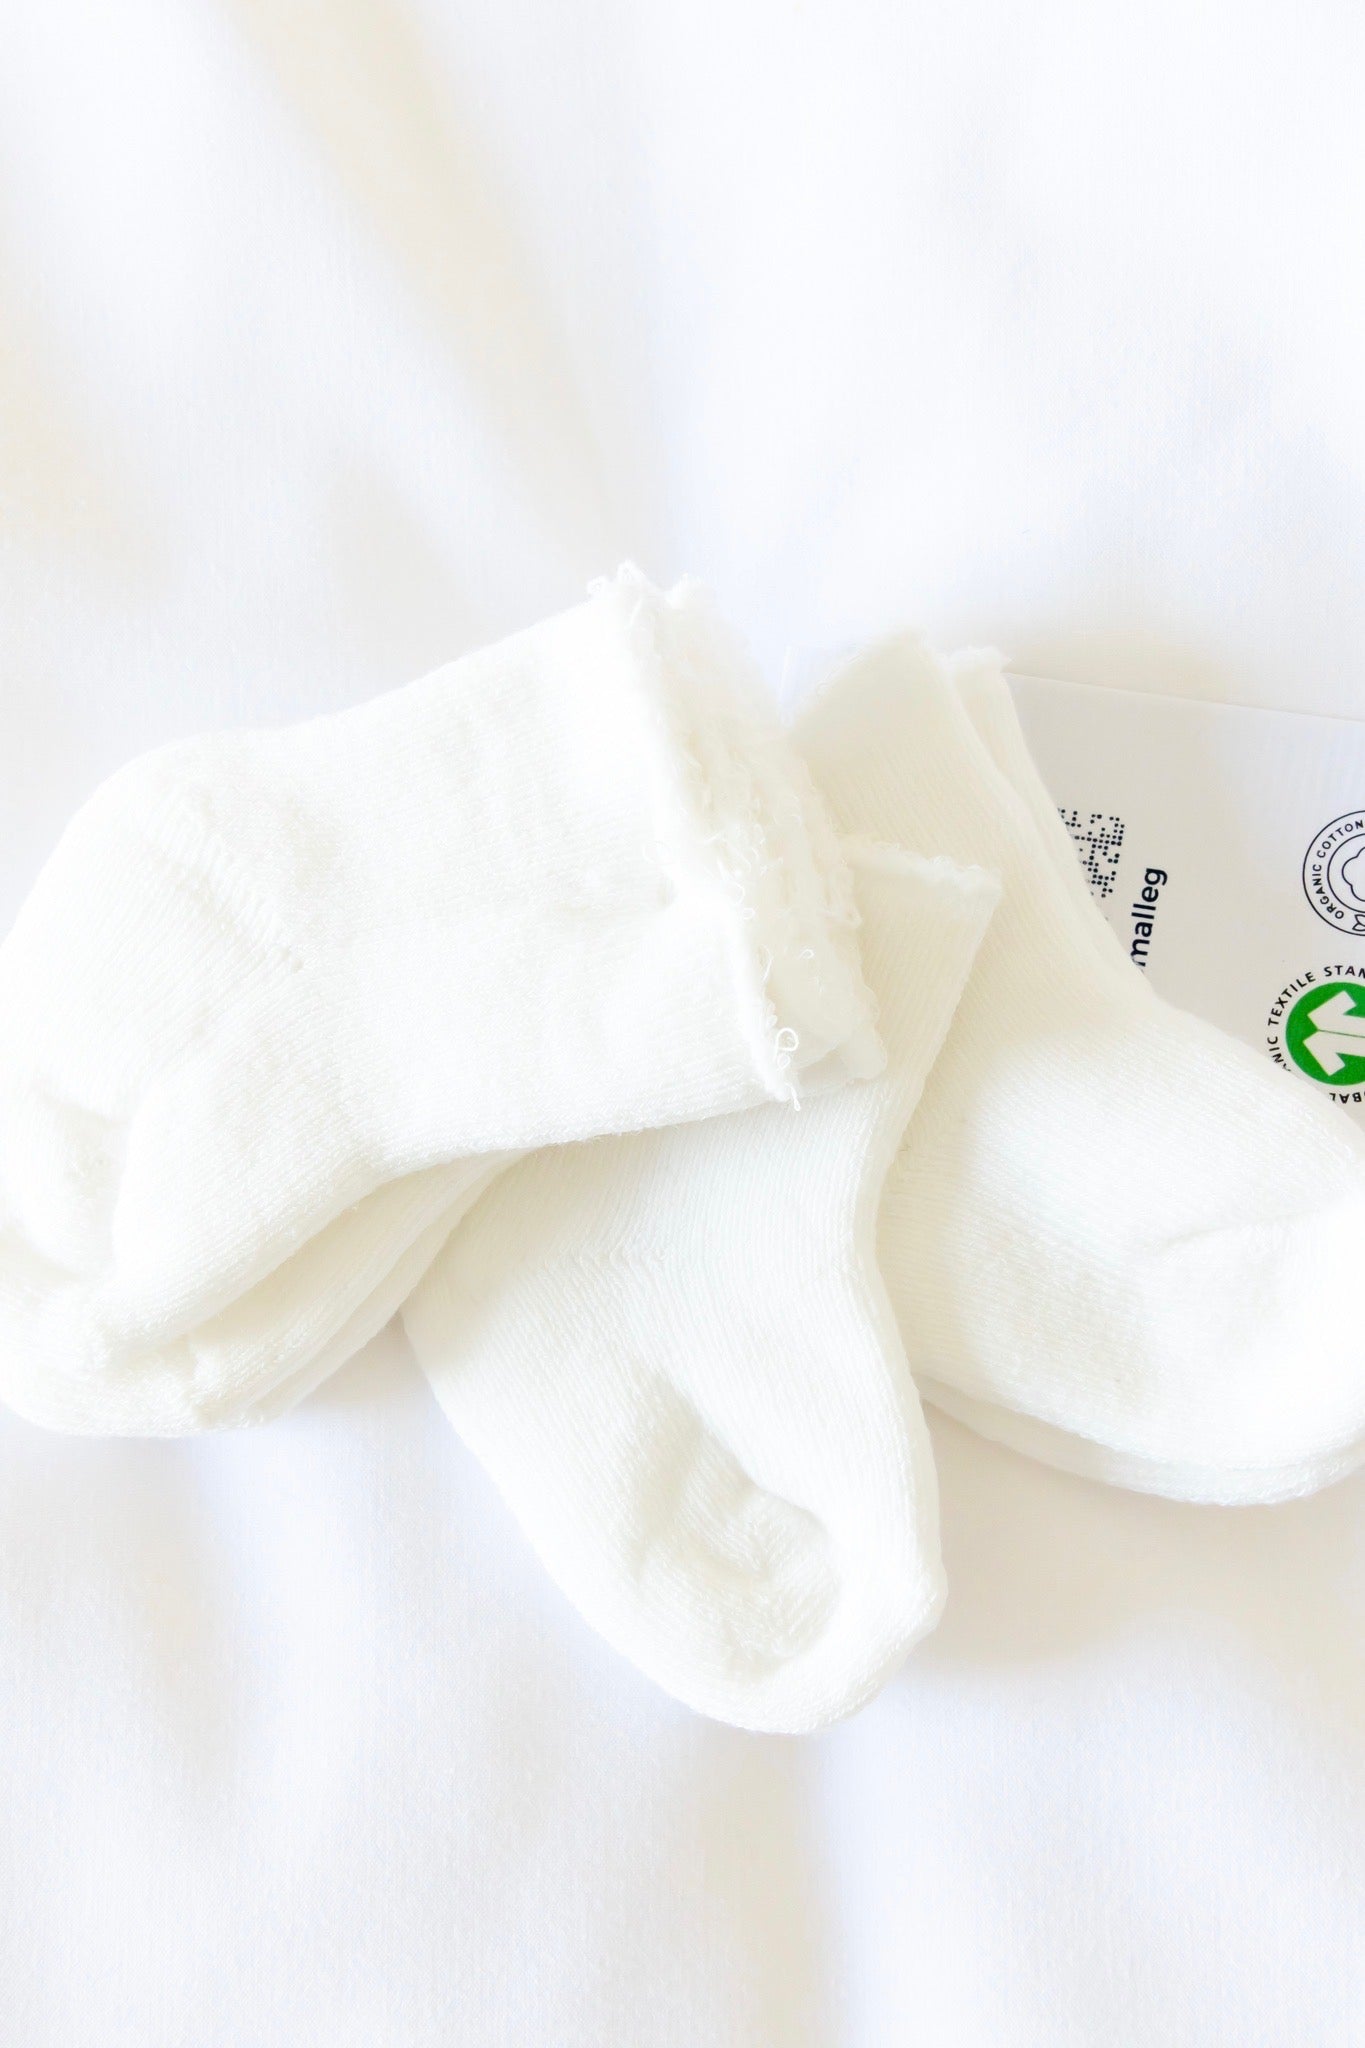 Certified Organic Knitted Baby Socks- Pack of 3 White Pairs